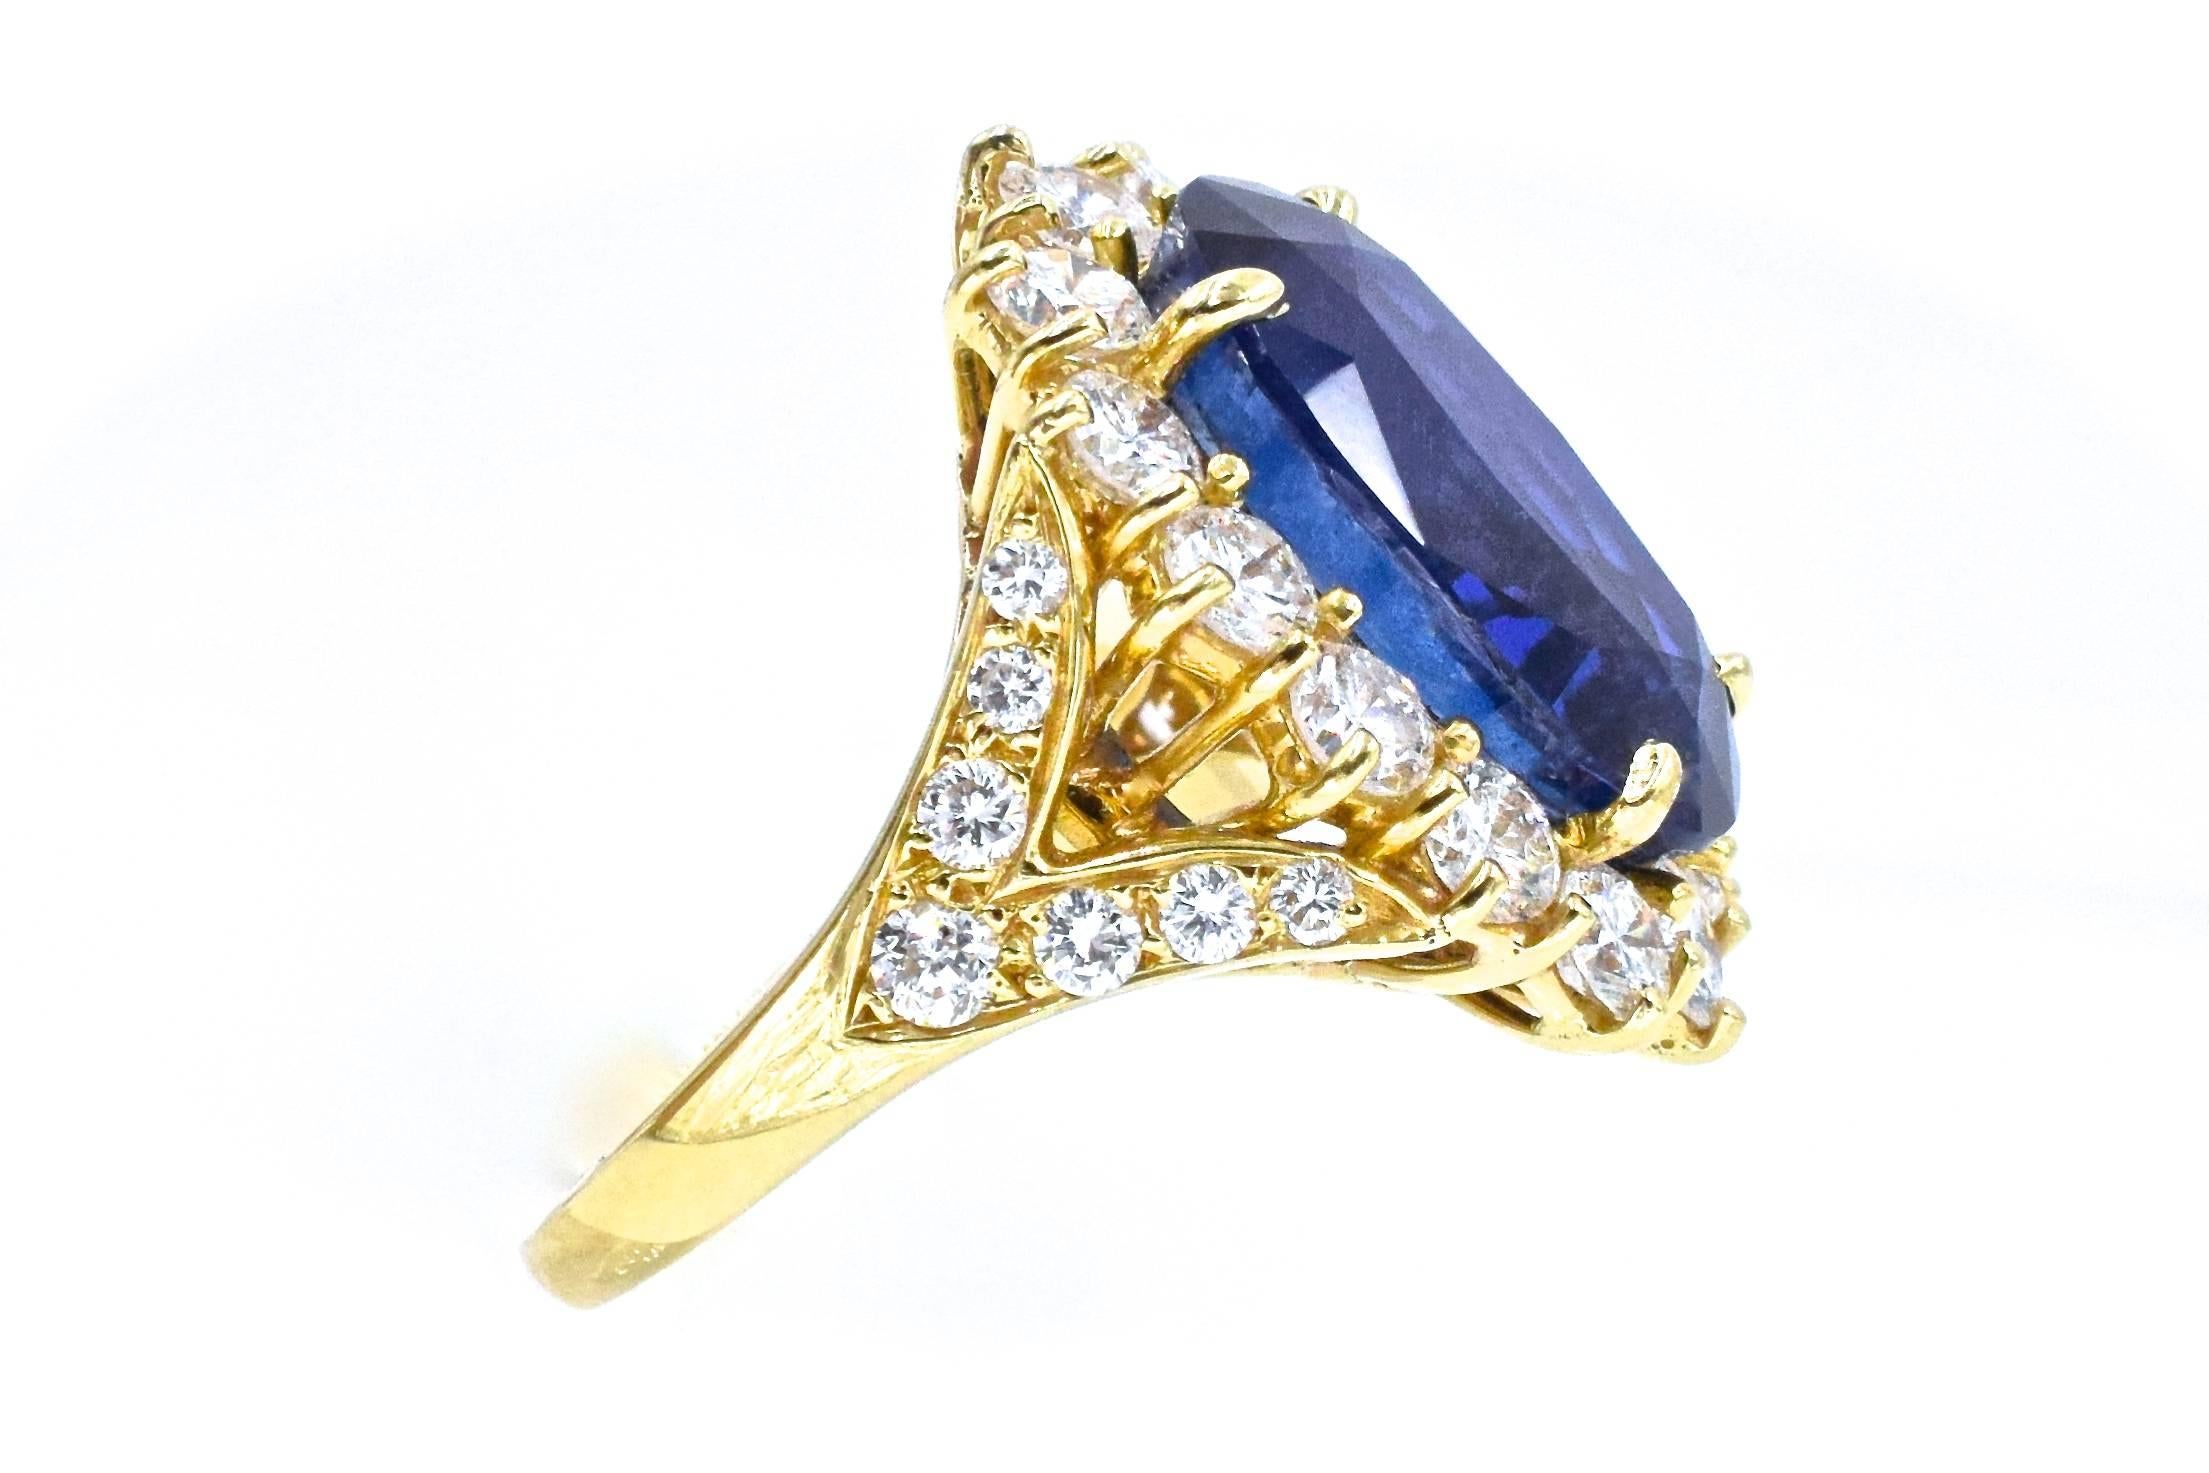 Van Cleef & Arpels No Enhancement Burmese 12.01 carat Sapphire  Diamond  Ring In Excellent Condition For Sale In New York, NY